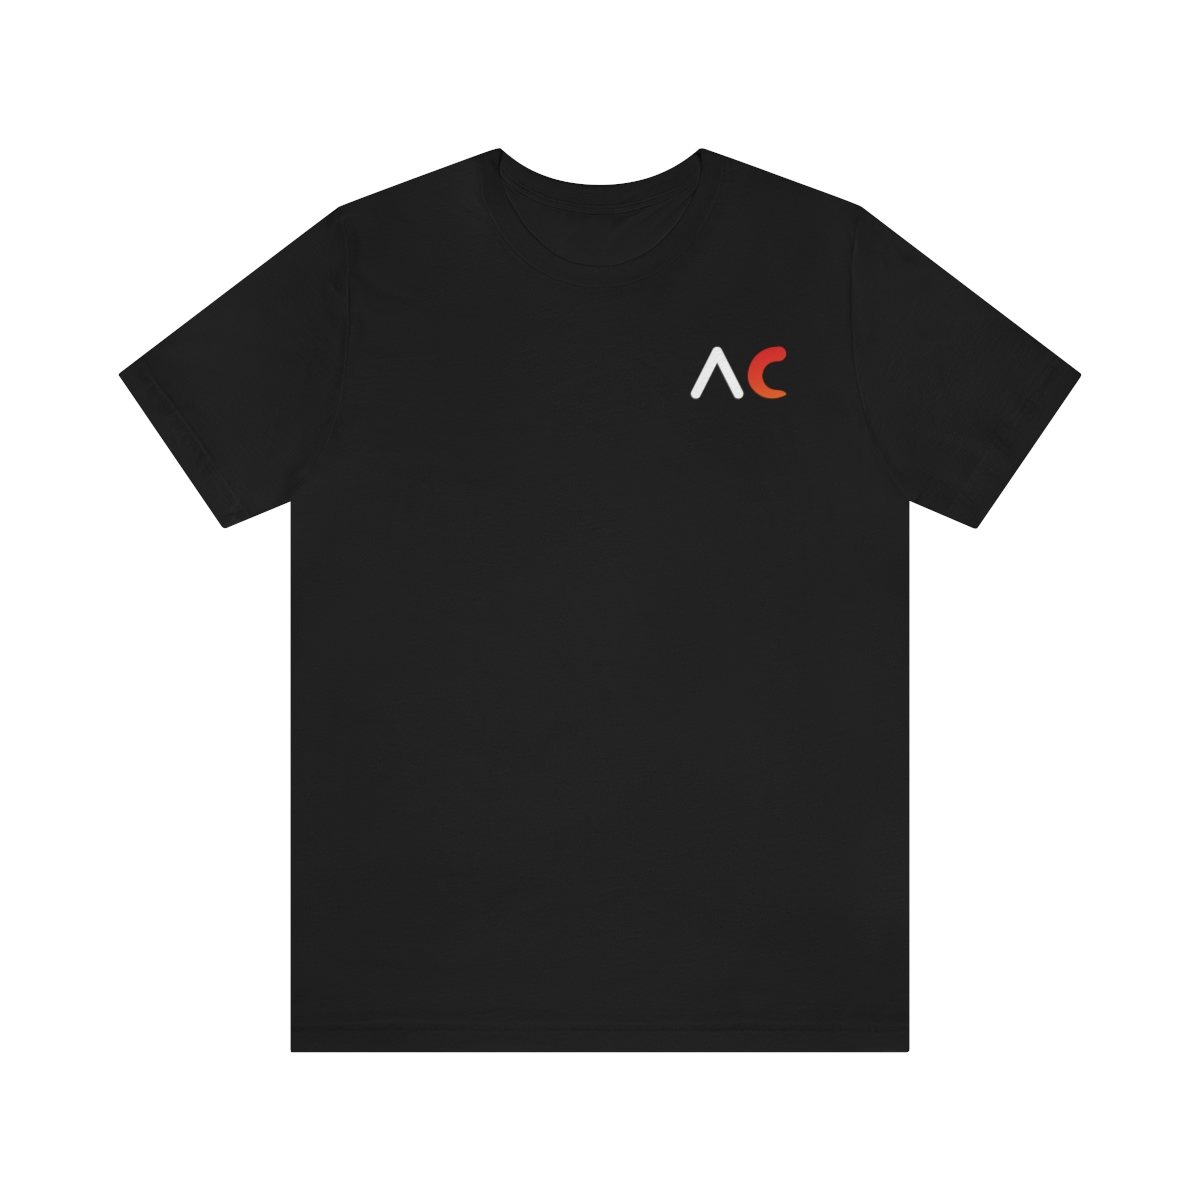 Front view of a black t-shirt with stylized "AC" over the left breast denoting sickle cell trait status.